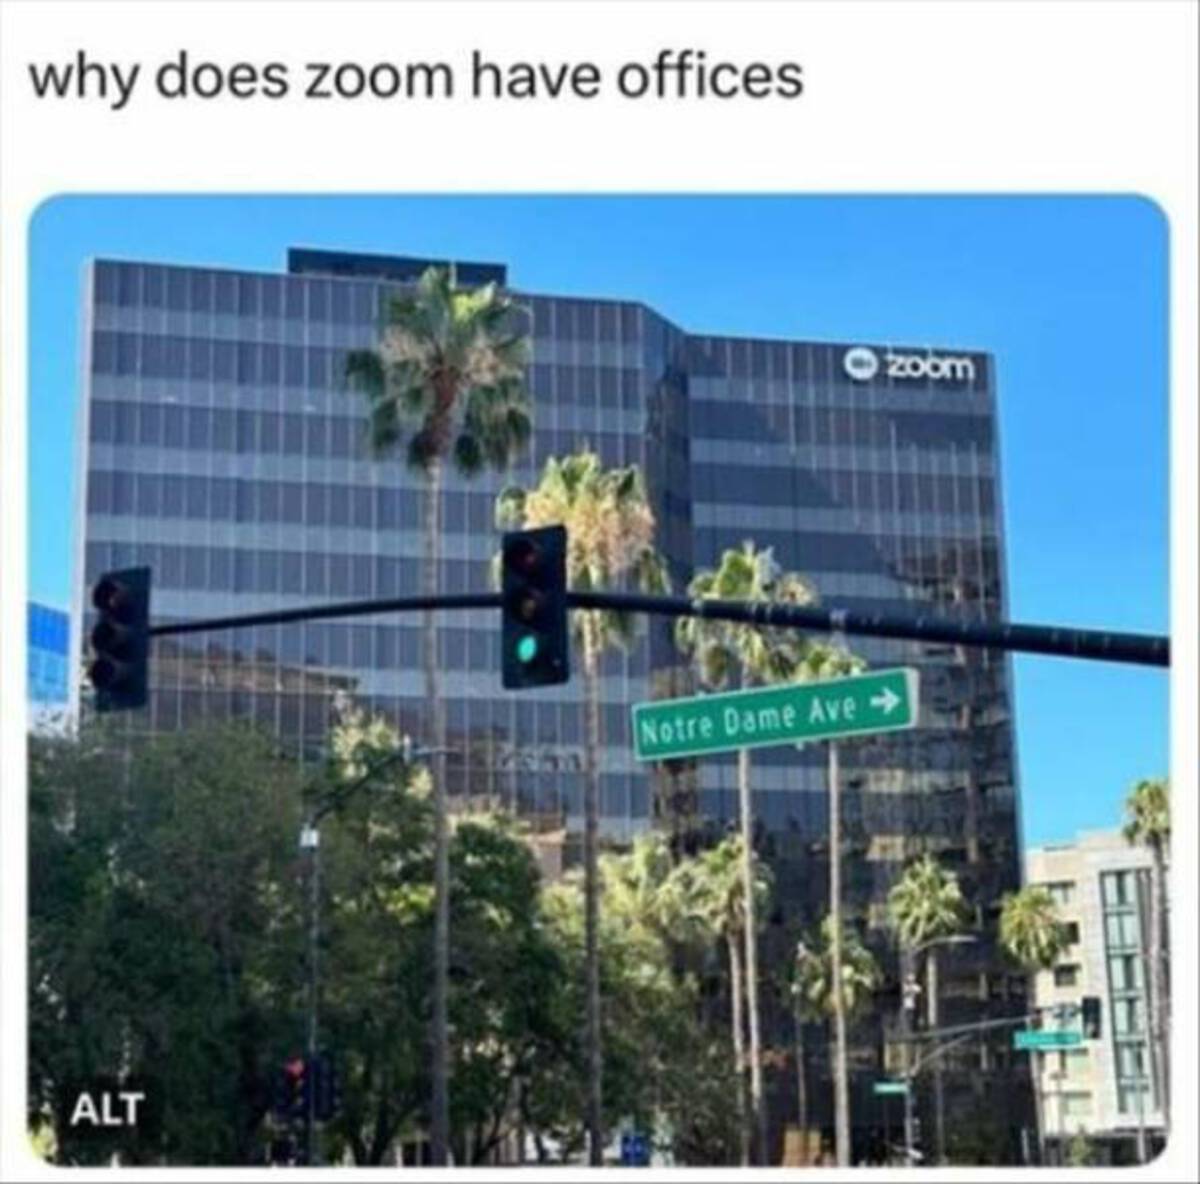 does zoom have offices - why does zoom have offices Alt Ozoom Notre Dame Ave >